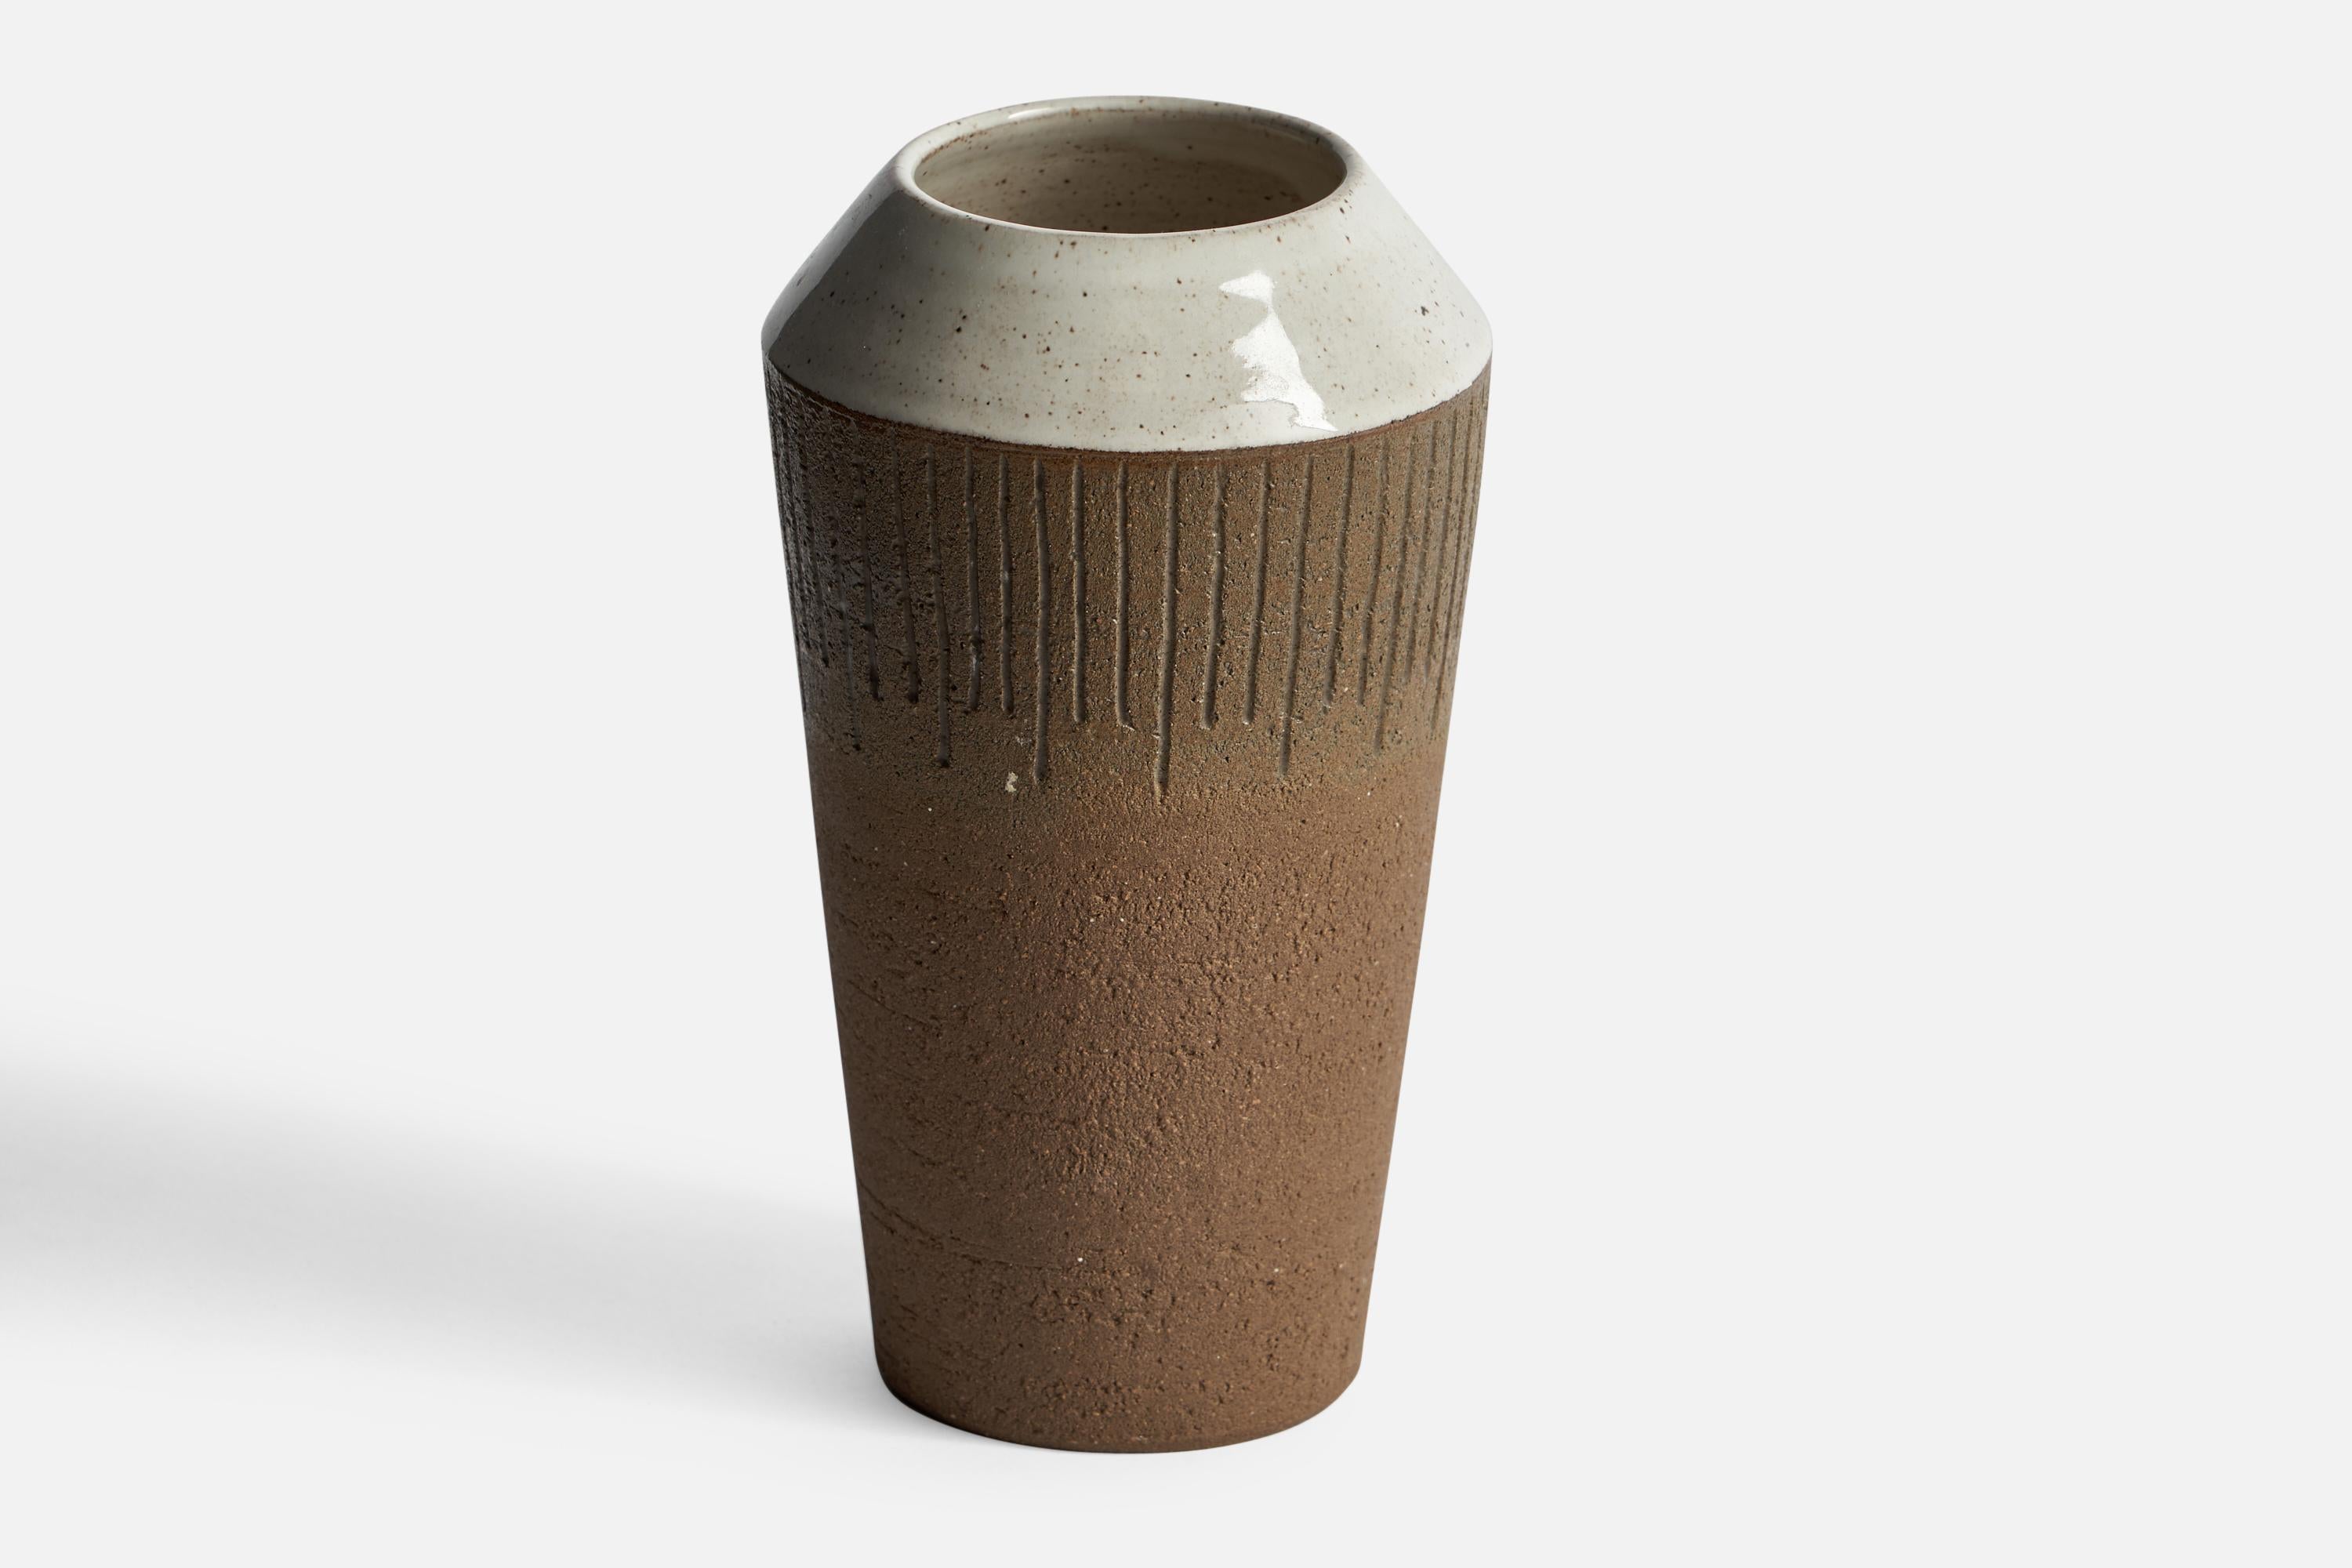 An off-white and brown semi-glazed ceramic vase designed and produced by Aage Rasmus Selsbo, Sweden, 1960s.